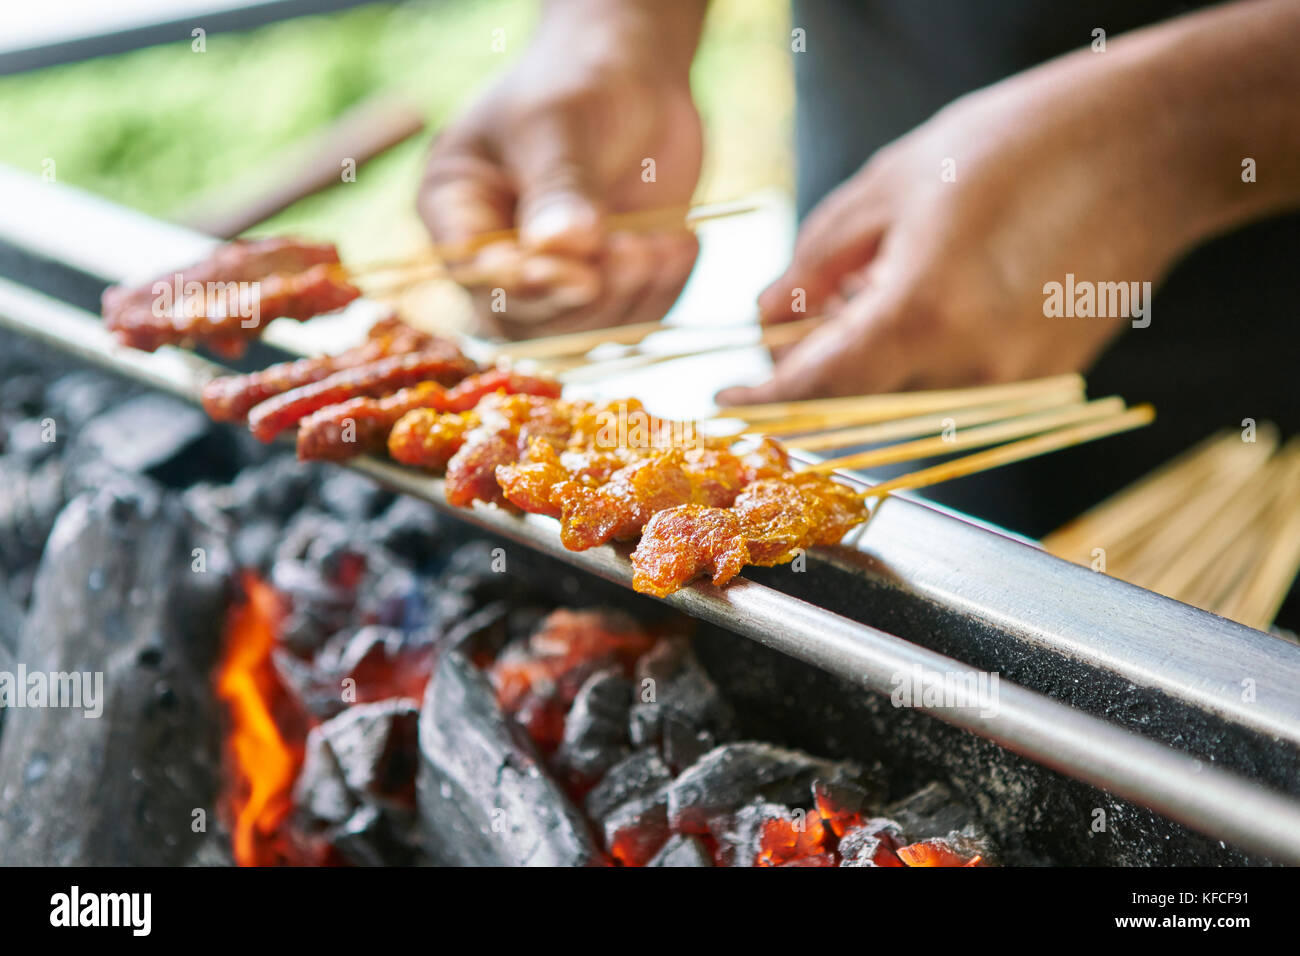 A man cooks satay over hot coals in Singapore - Satay by the Bay Stock Photo